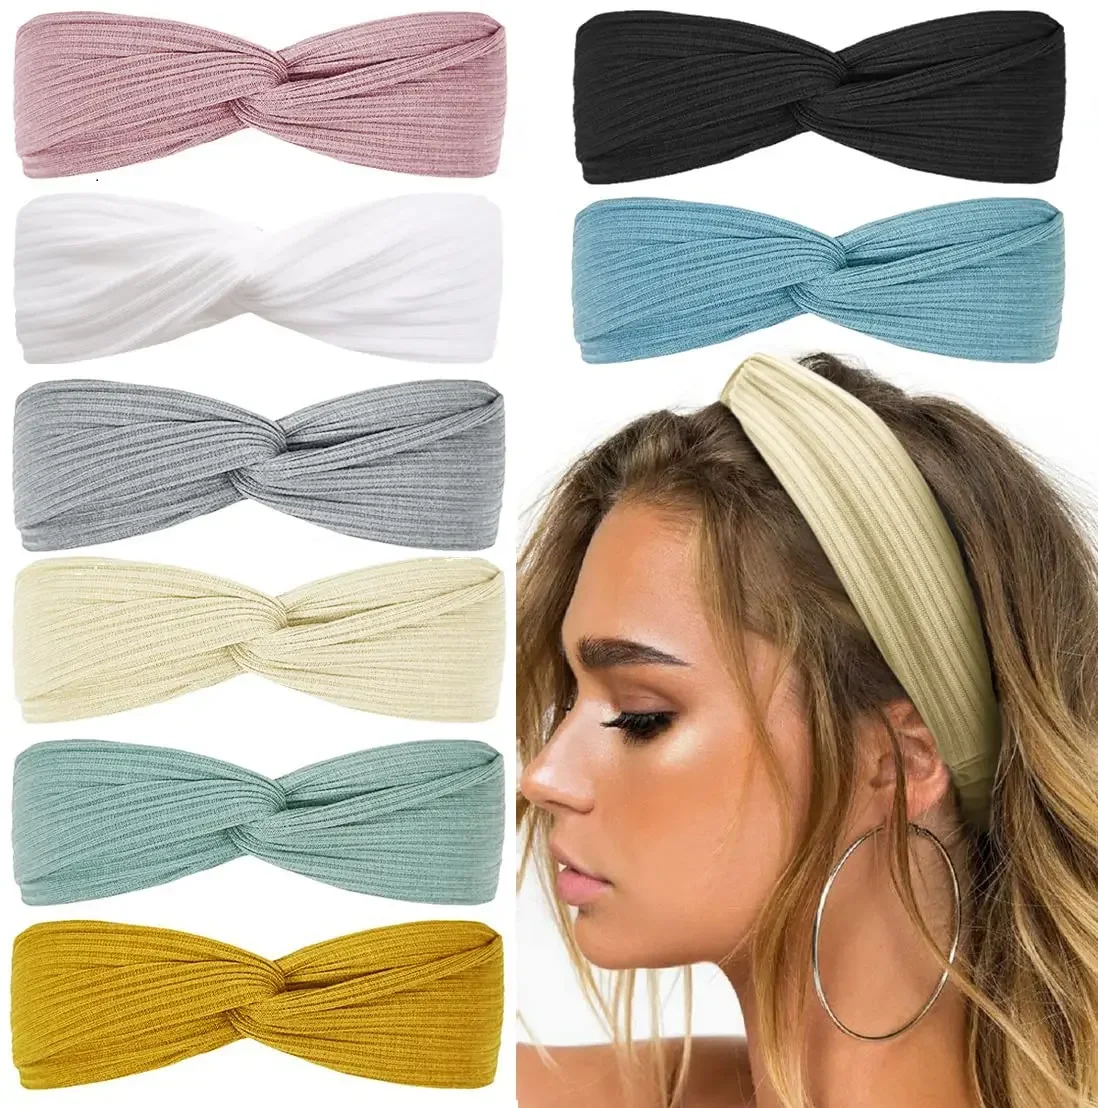 8Pcs Boho Head Bands for Women's Hair Non Slip Twist Hair Bands for Short Hair Fashion Summer Hair Accessories, Solid Color vansvance core classic slip on solid slip on vn000eyew00